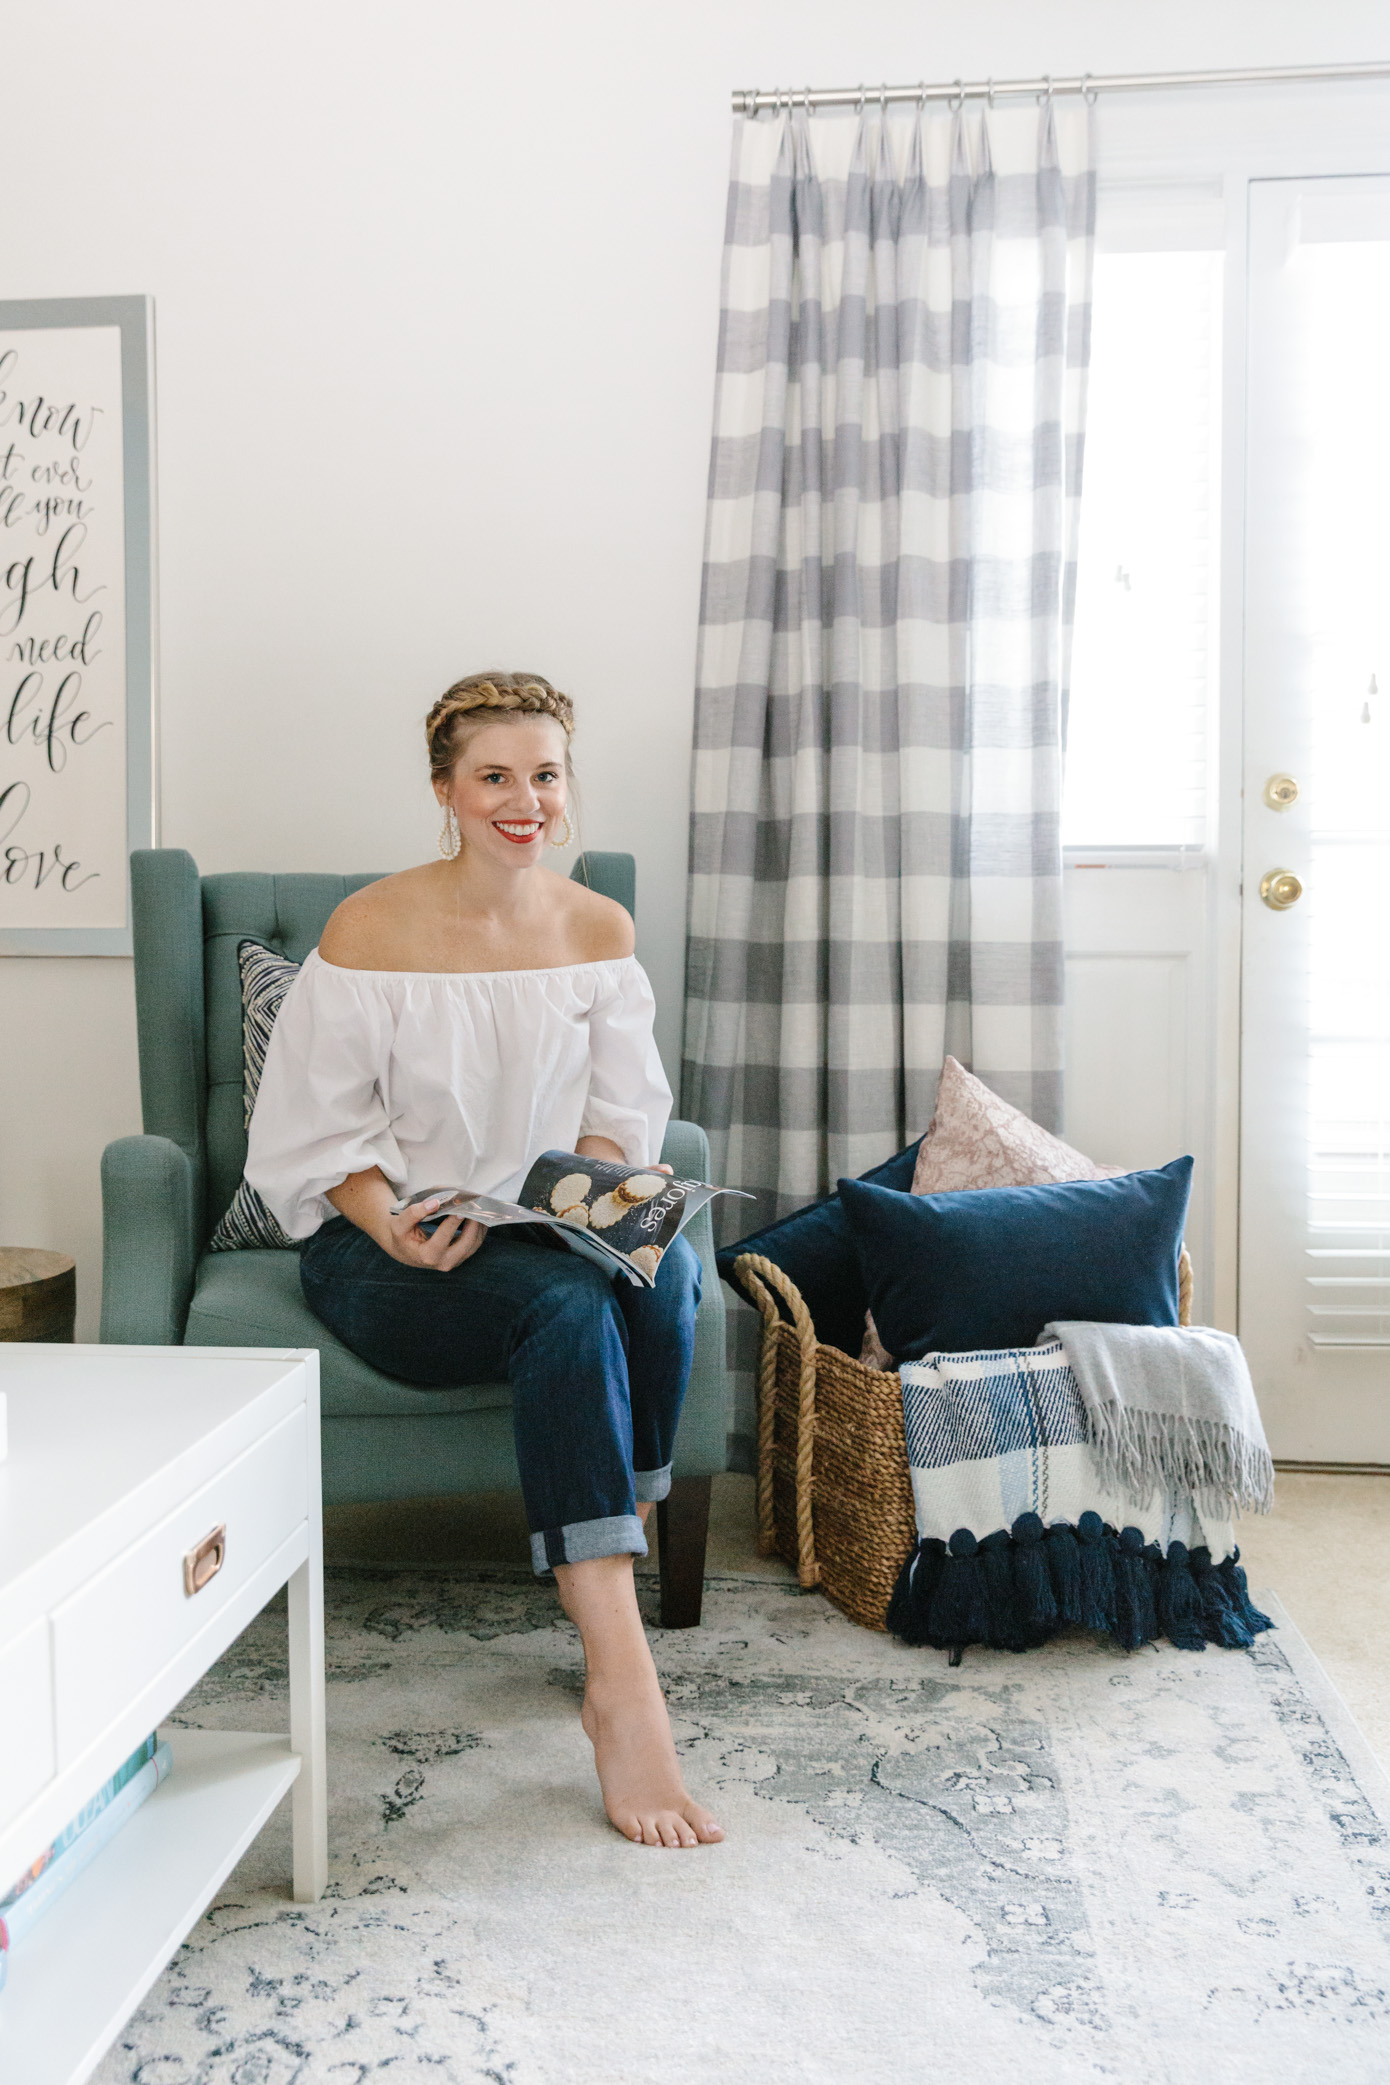 Statement Drapes | Gray and White Gingham Drapes | Louella Reese Life & Style Blog 